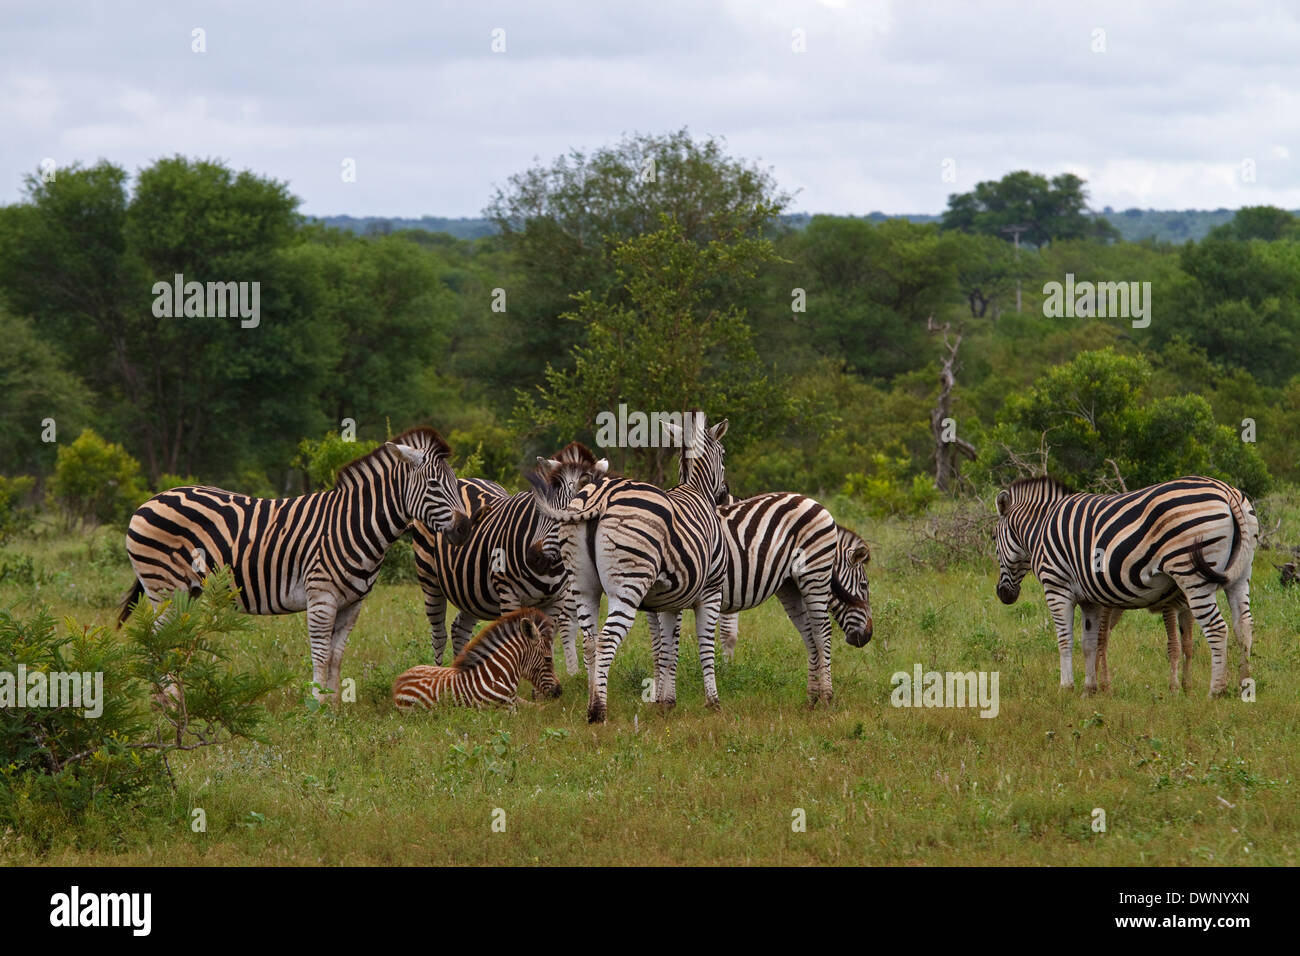 A small group of Burchell's Zebras (Equus quagga burchelli). Kruger National Park South Africa Stock Photo